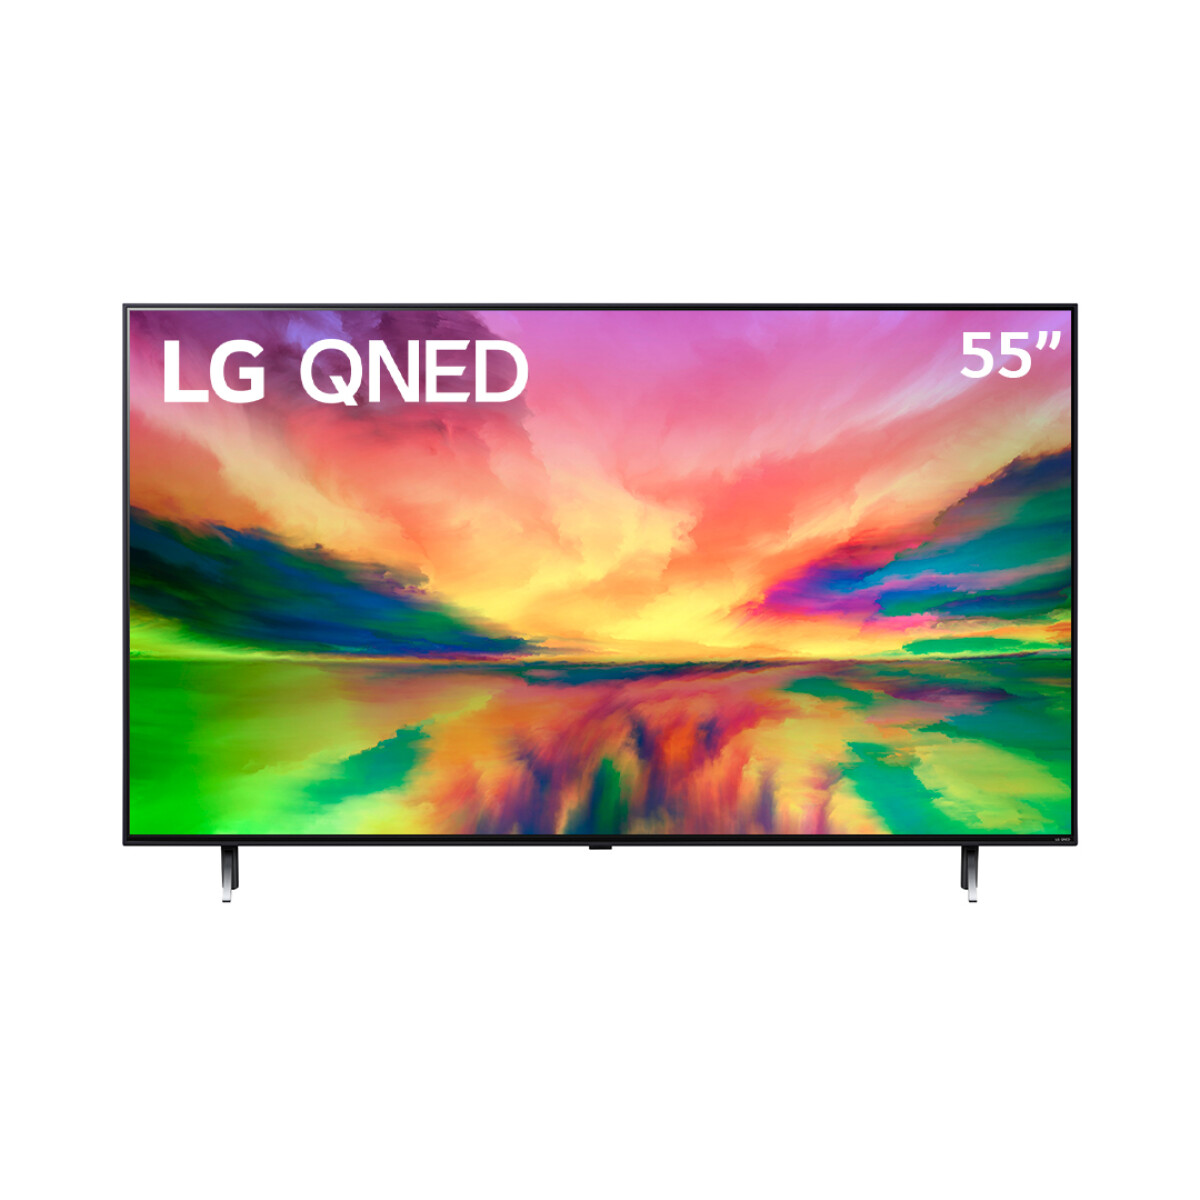 LG QNED 4K 55" 55QNED80 - 001 